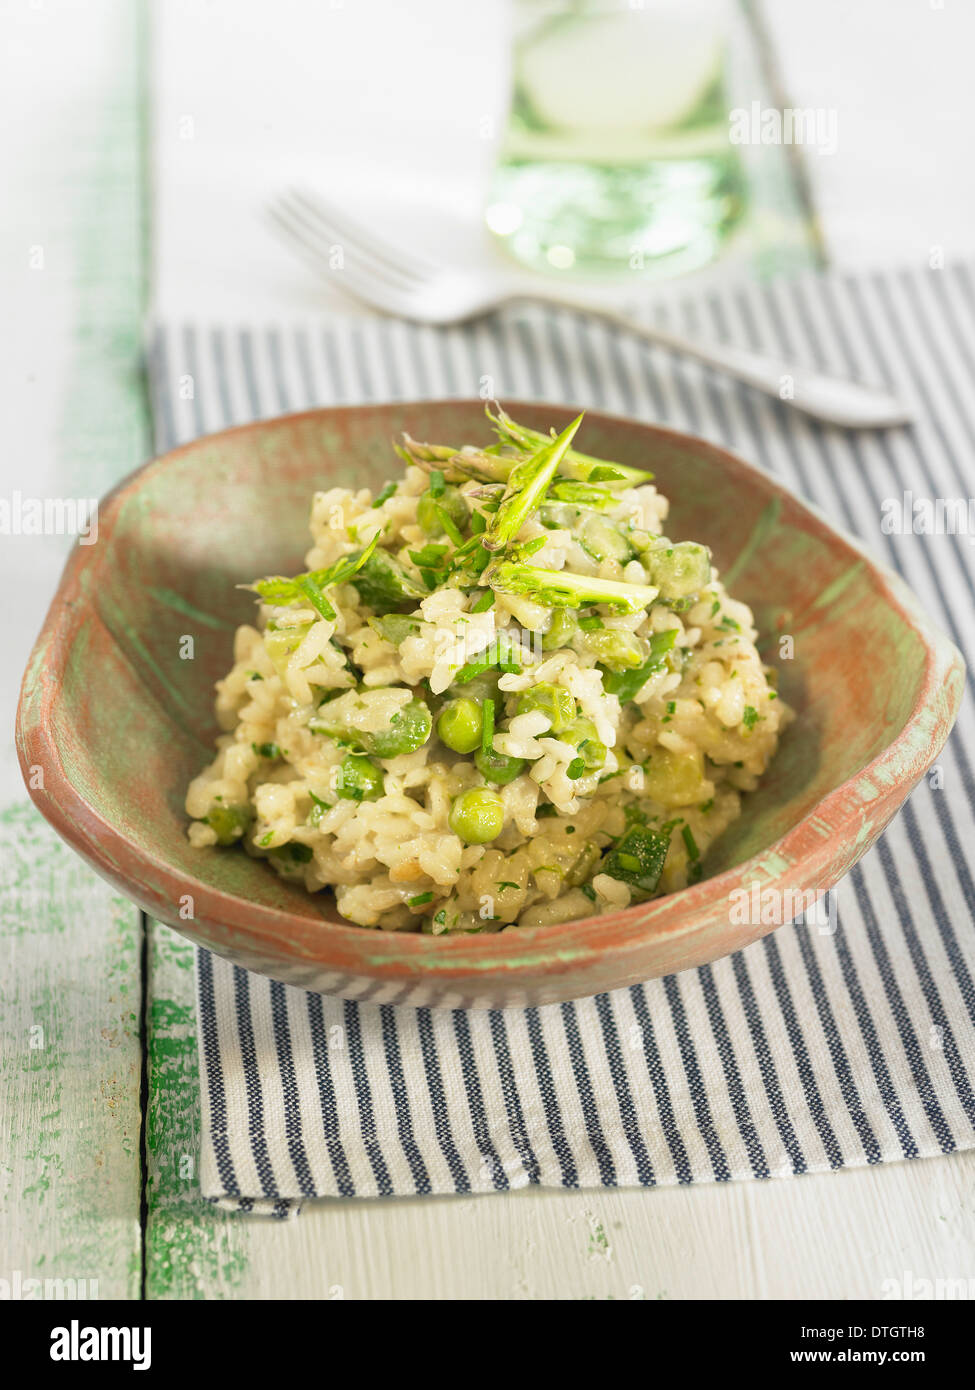 Green risotto with parmesan,celery,fennel and zucchinis Stock Photo